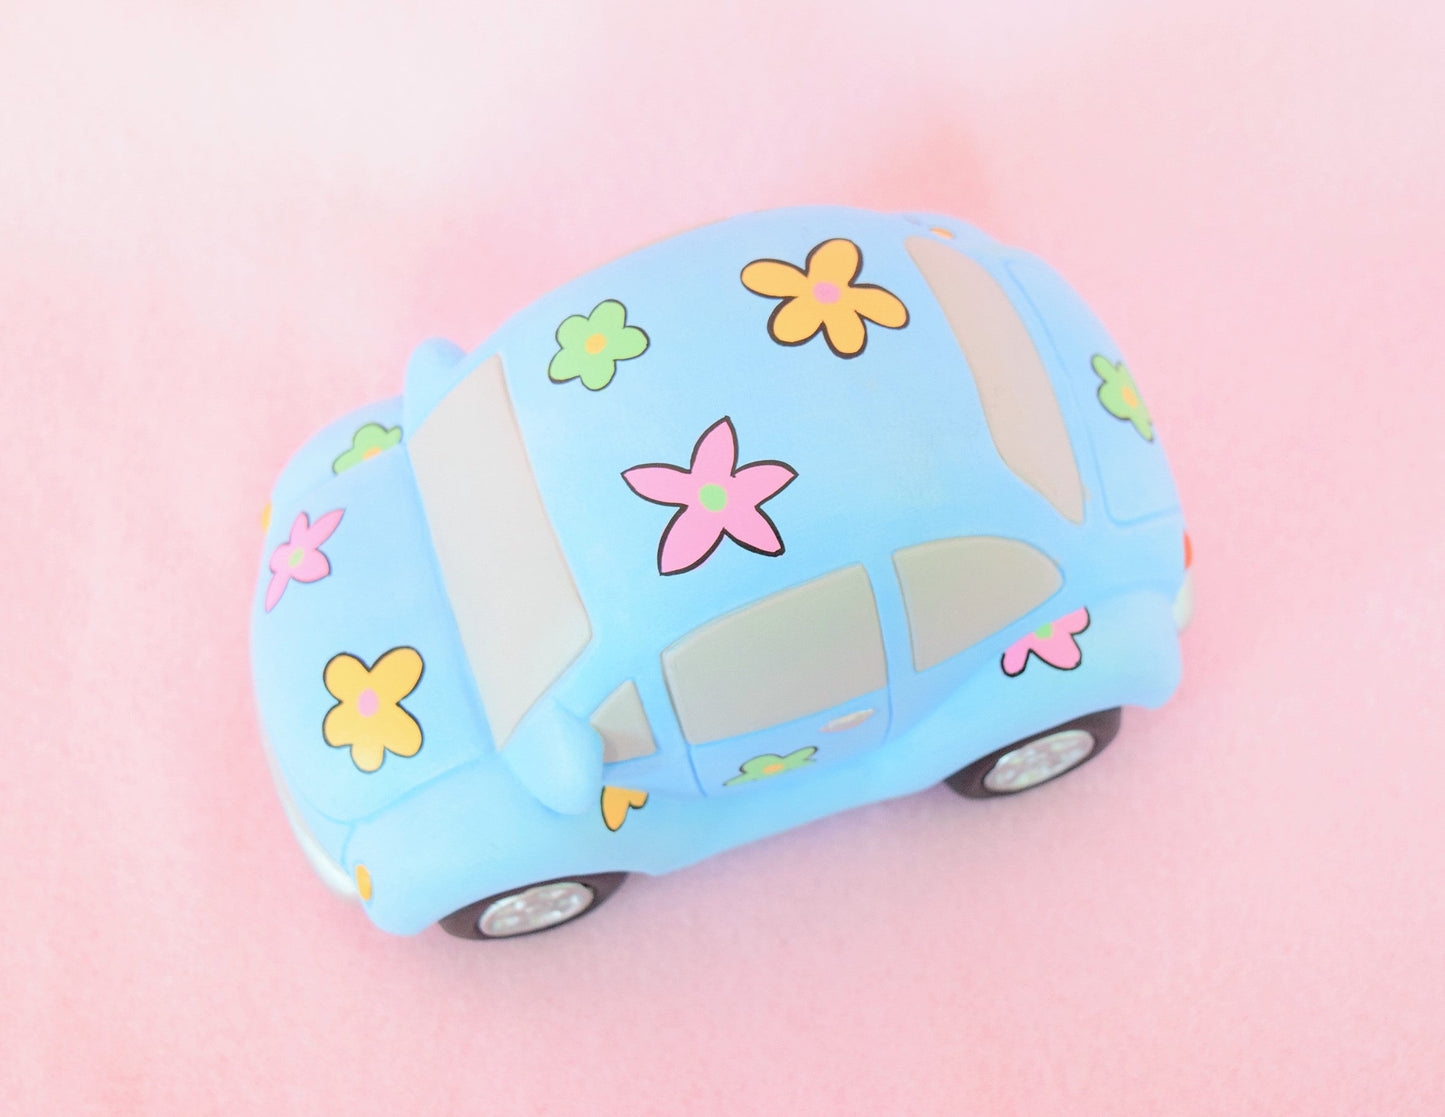 Volkswagen Beetle - VW Car - Flower Power Car - Cute Blue  Volkswagon - VW collectible - Mothers Day gift - Volkswagon Decoration